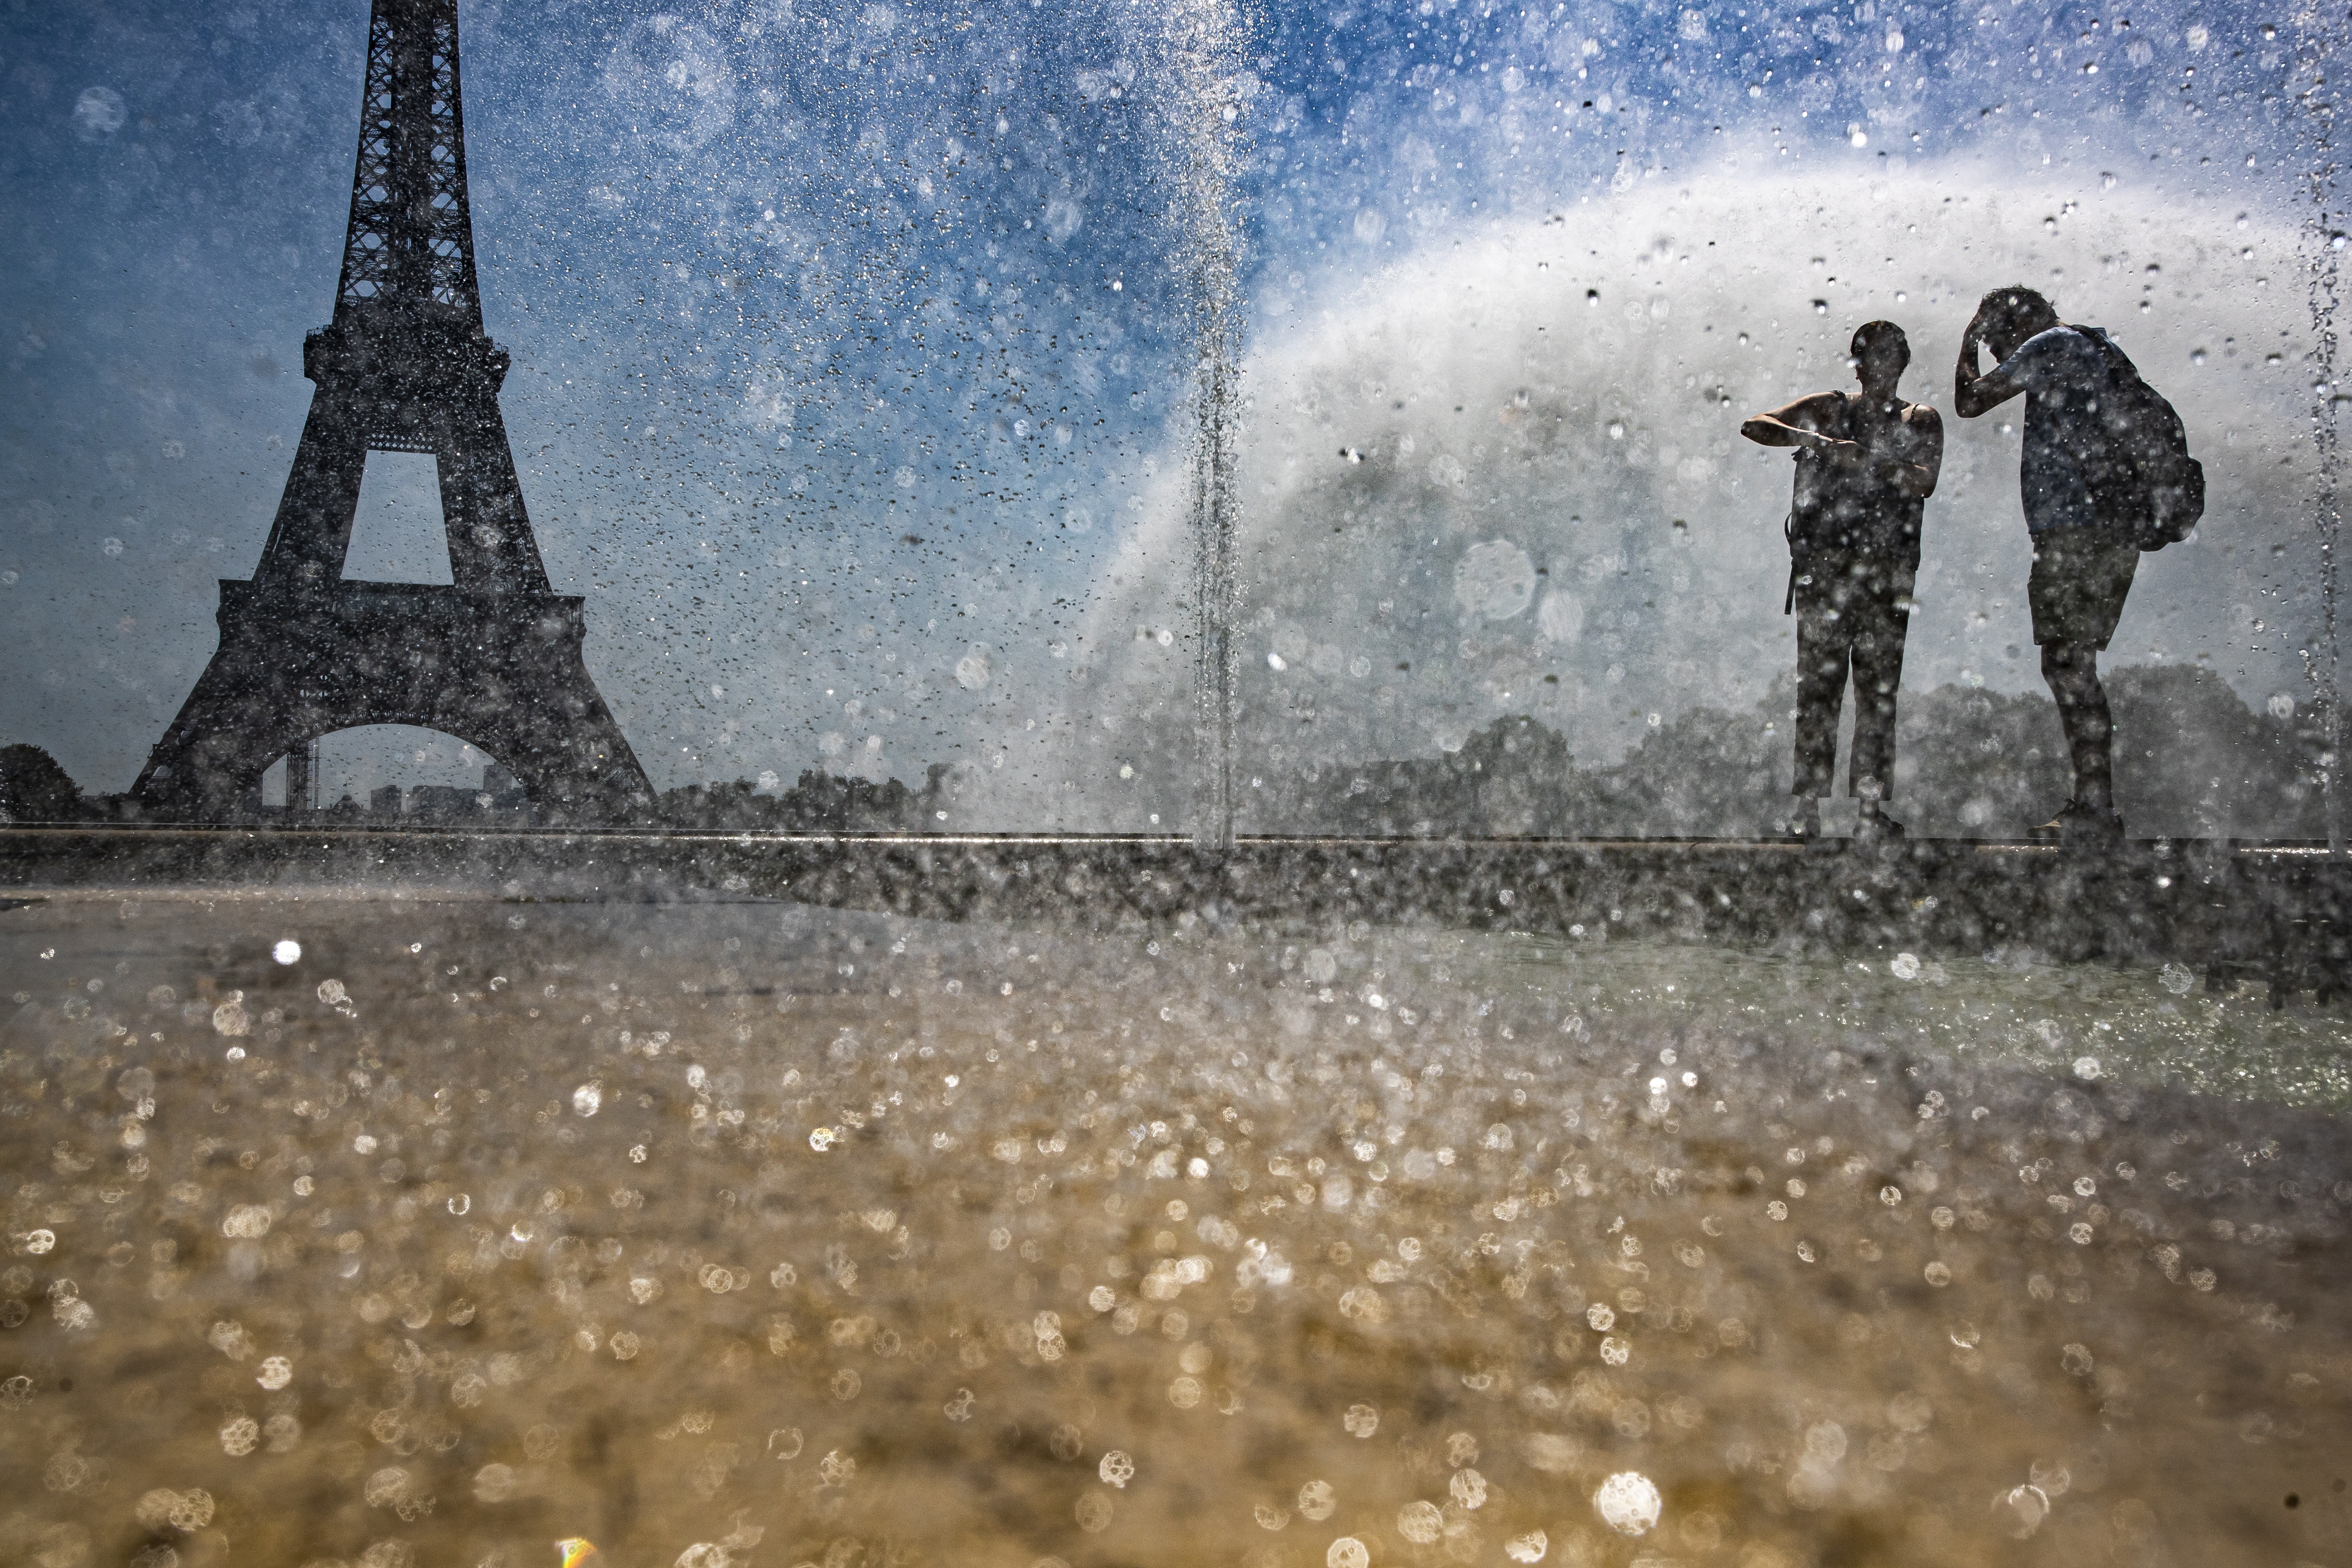 epa07735299 People cool down at the fountains of Trocadero, across from the Eiffel Tower, during a heatwave in Paris, France, 23 July 2019.  According to forecast, France will experience high temperatures across the country.  EPA/IAN LANGSDON